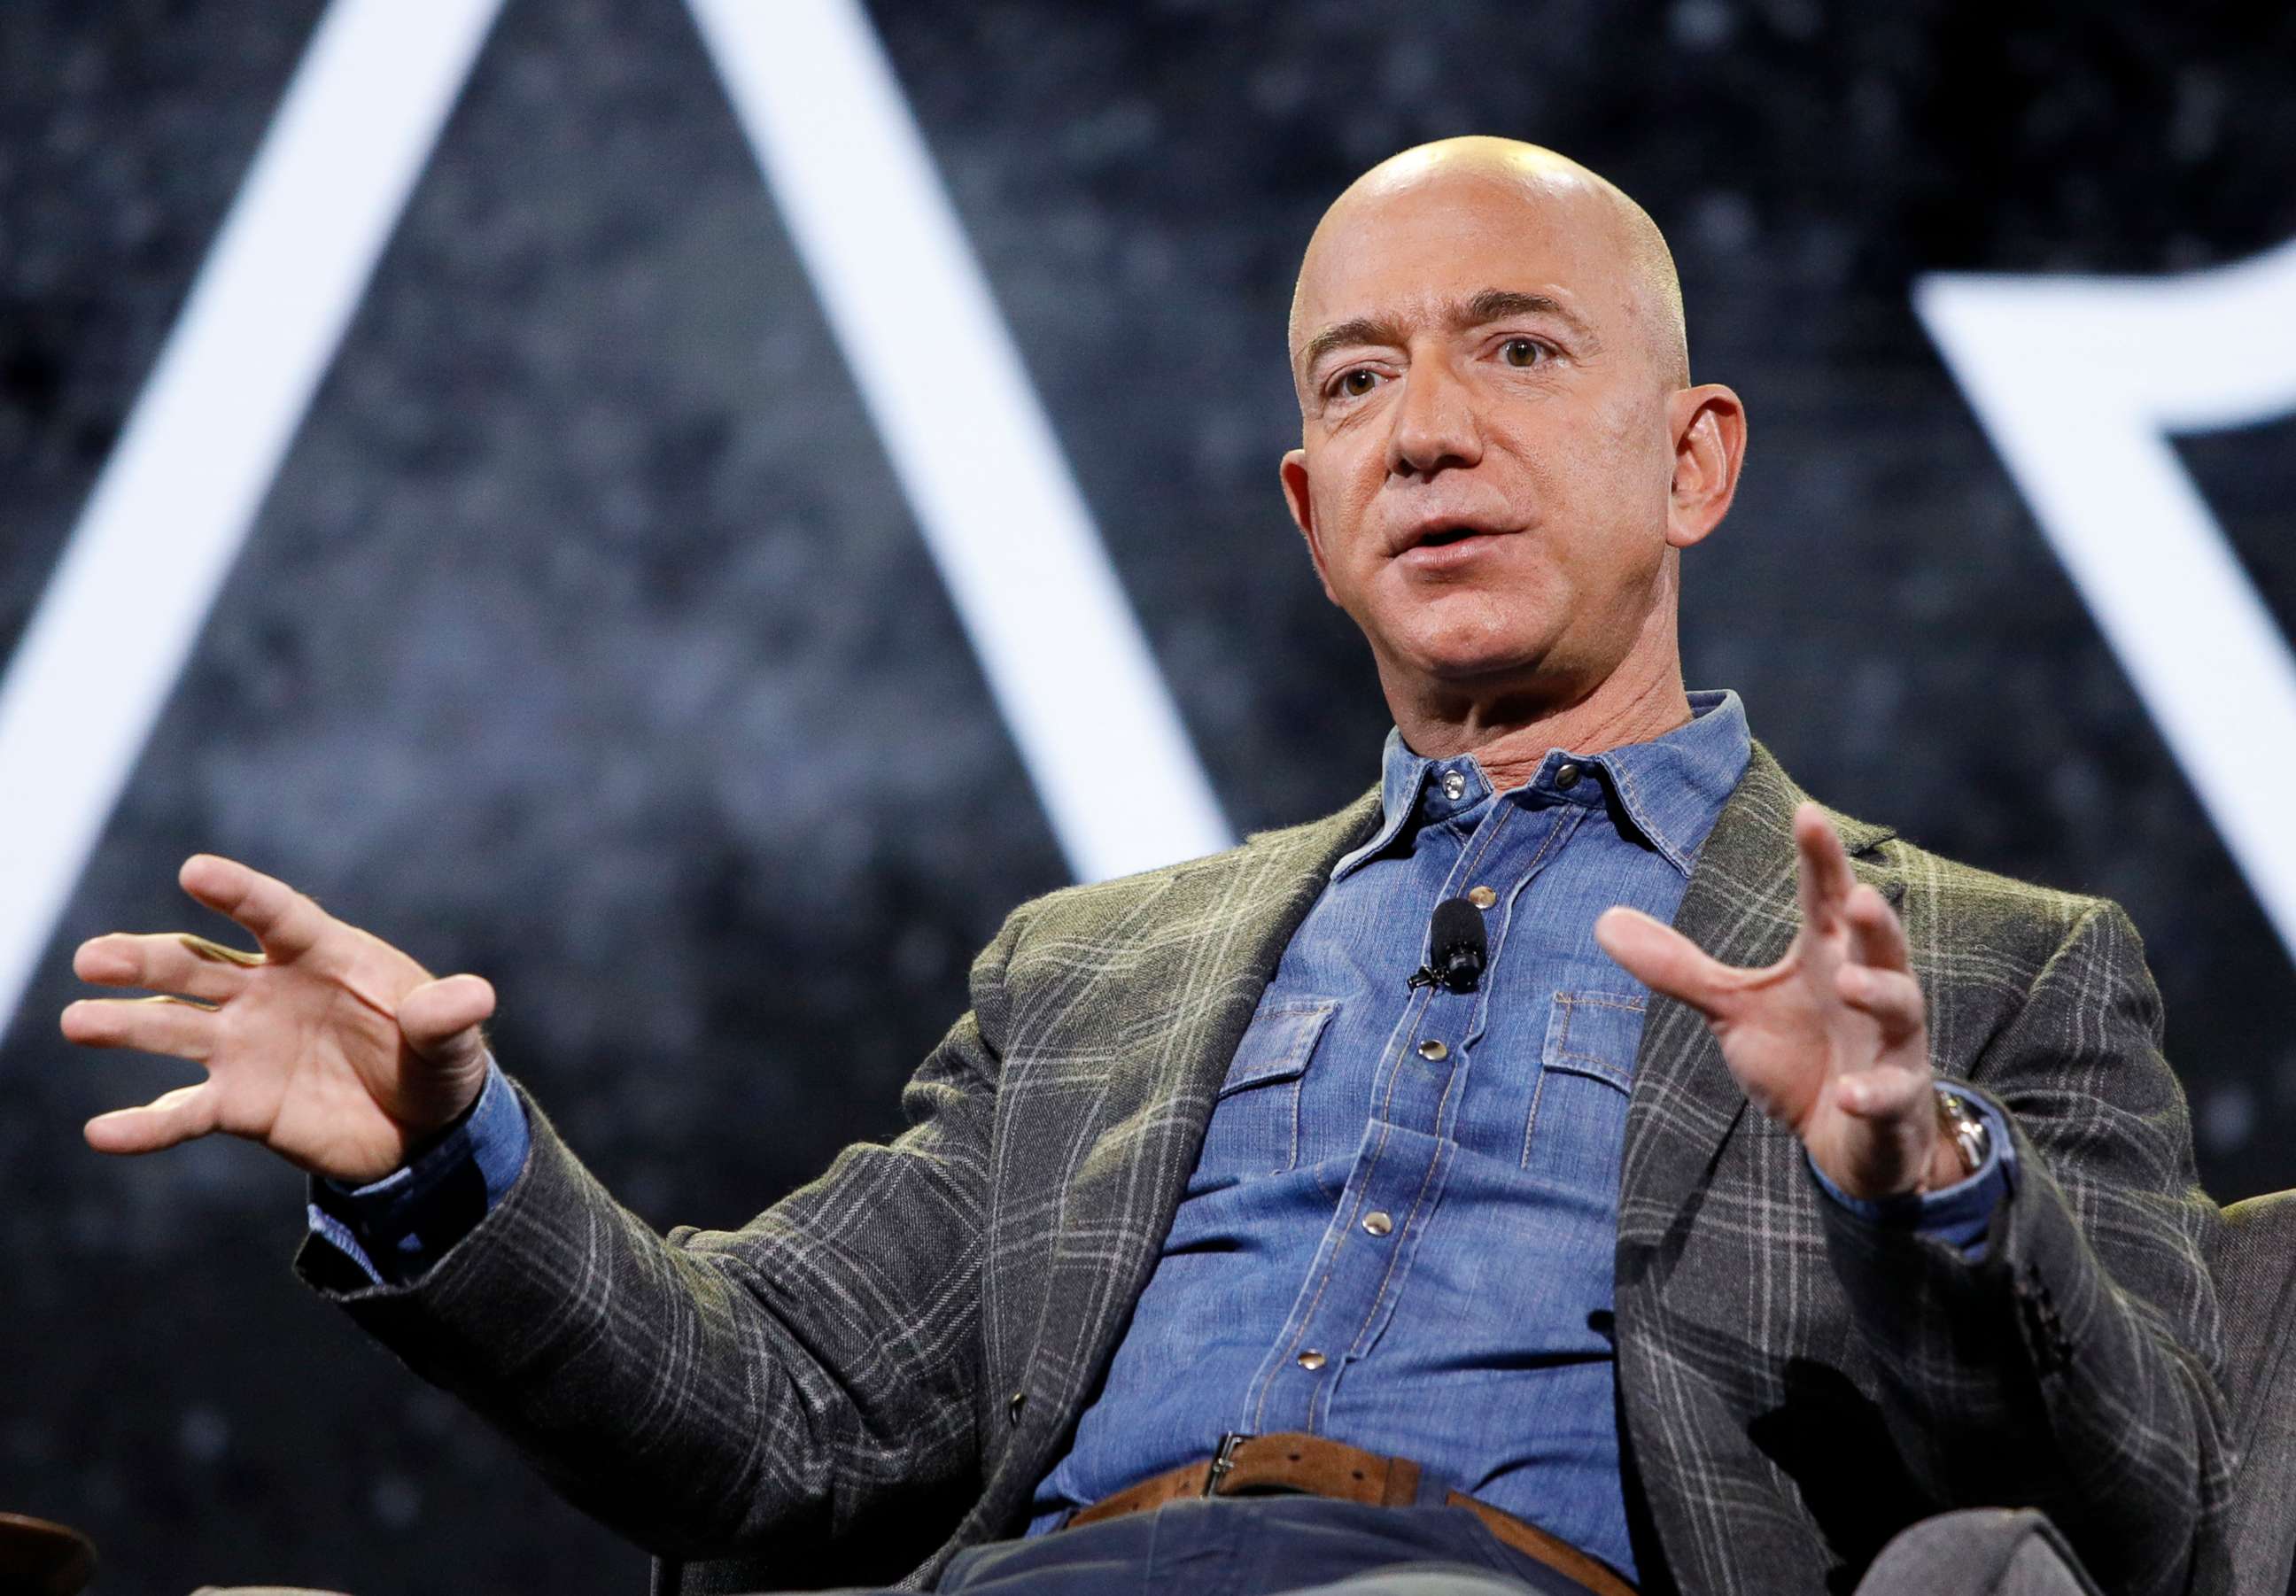 PHOTO: In this June 6, 2019 file photo, Amazon CEO Jeff Bezos speaks at the the Amazon re:MARS convention, in Las Vegas.